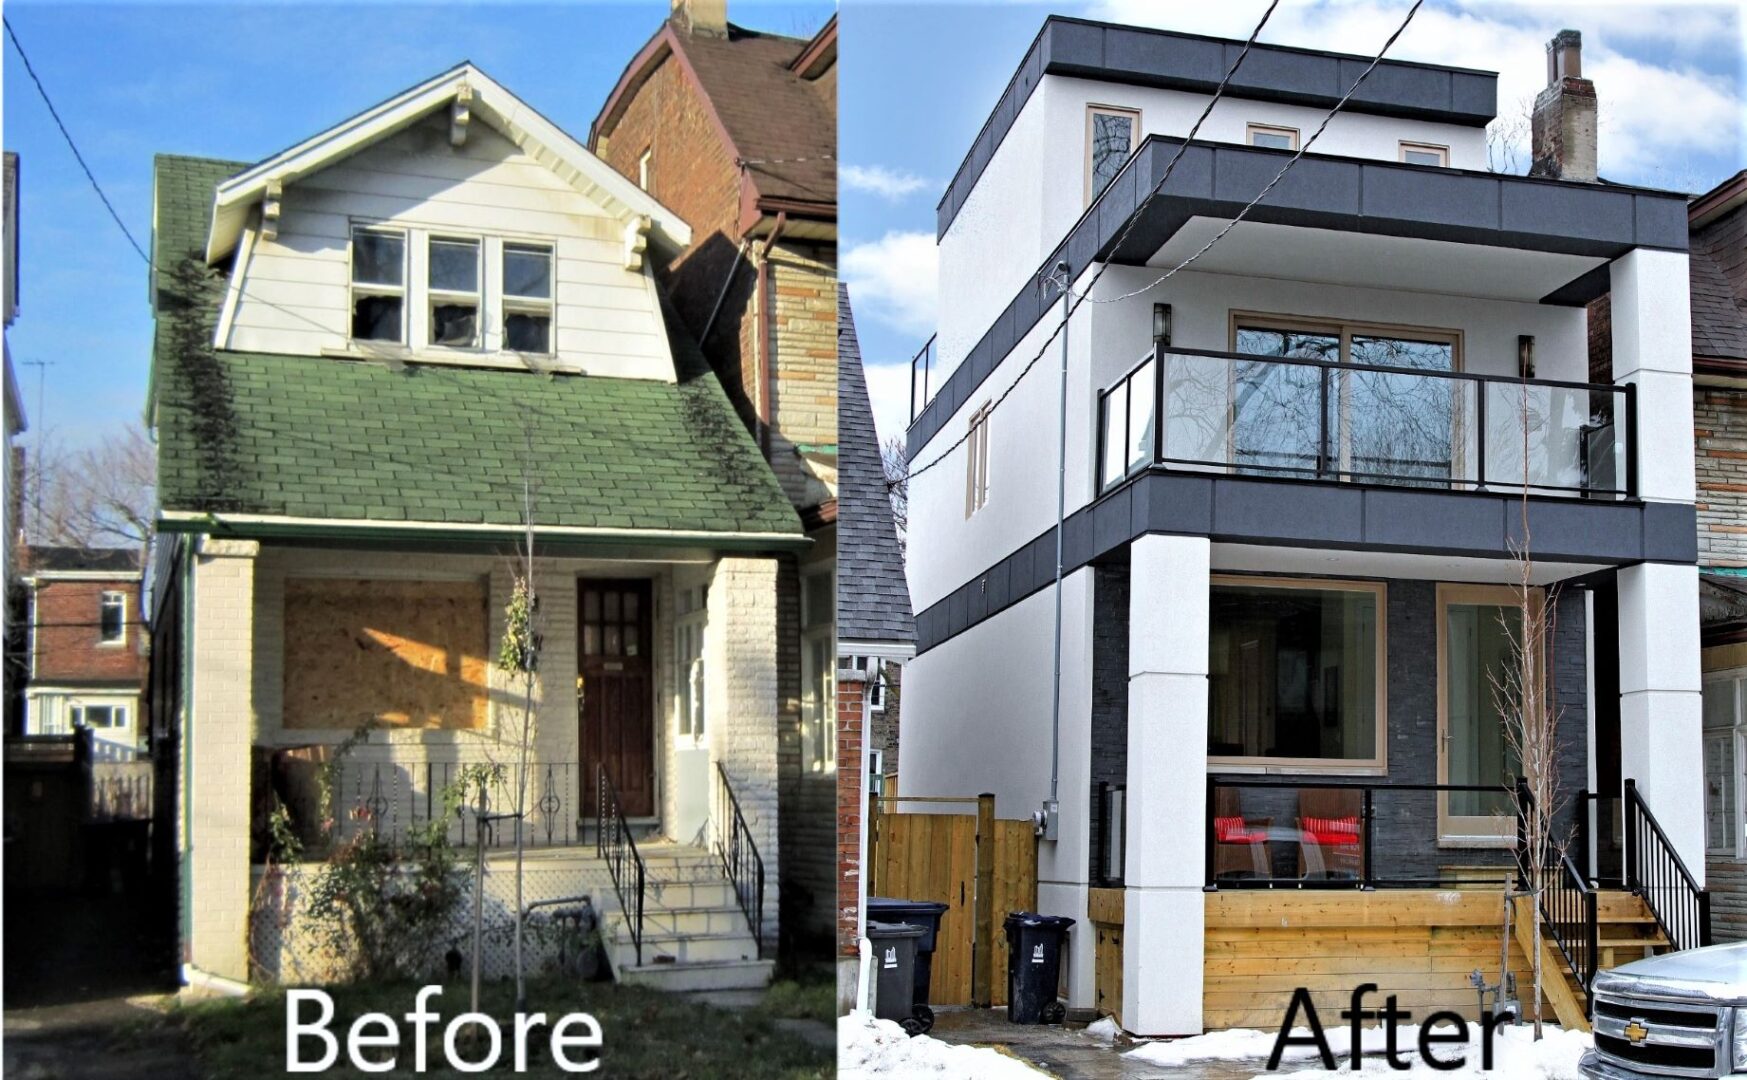 before and after images of a house